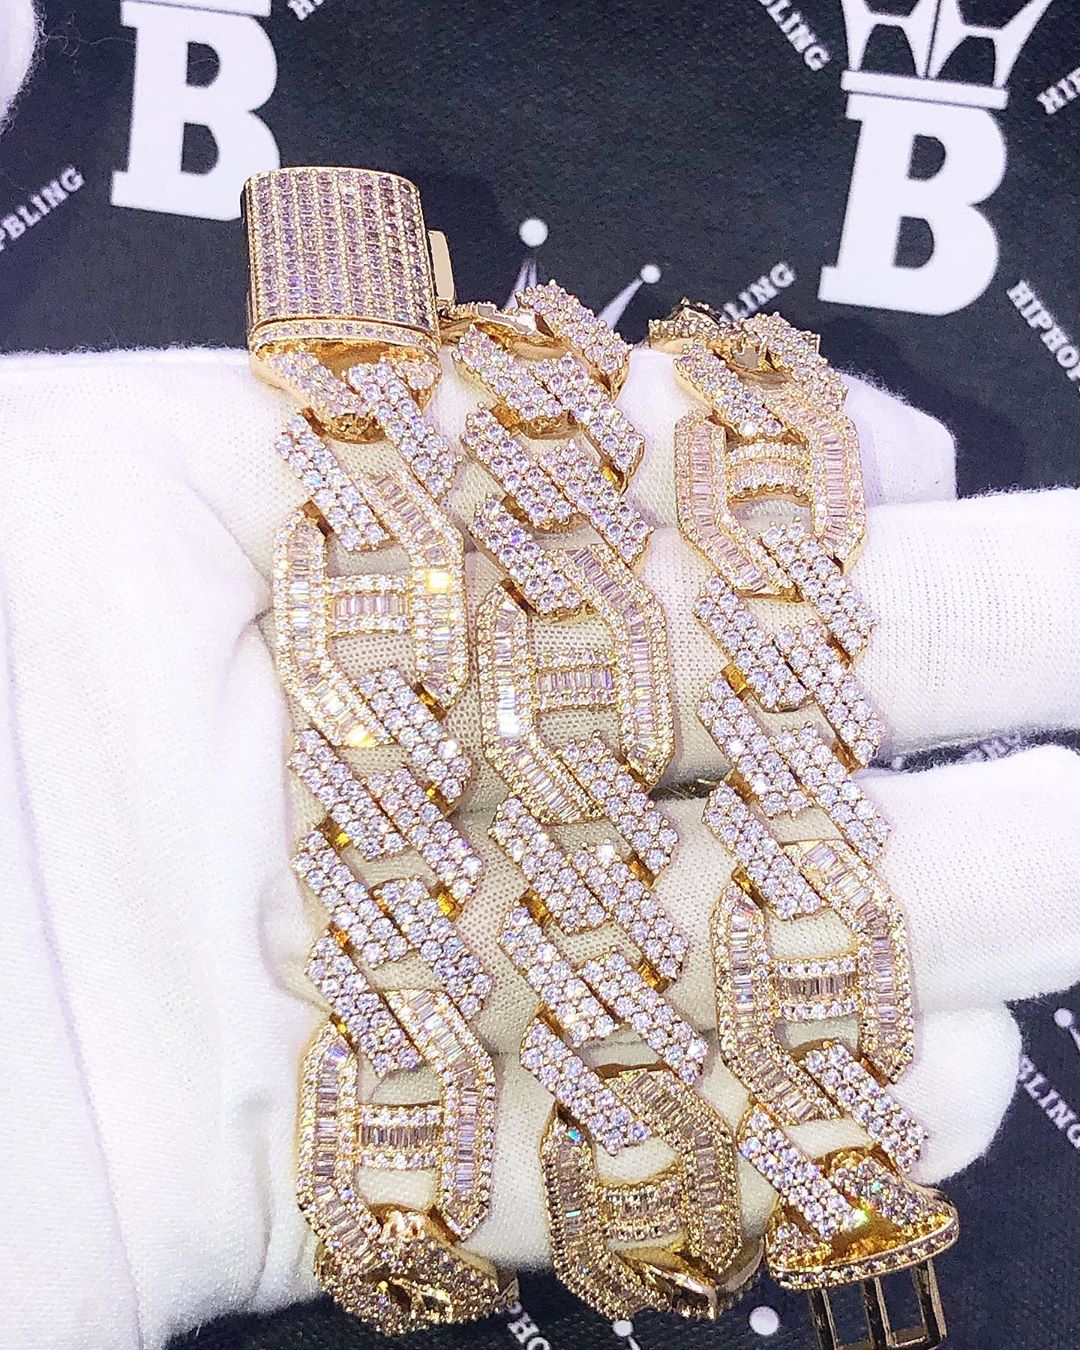 Order your own iced out chains and custom jewelry today from HipHopBling.com